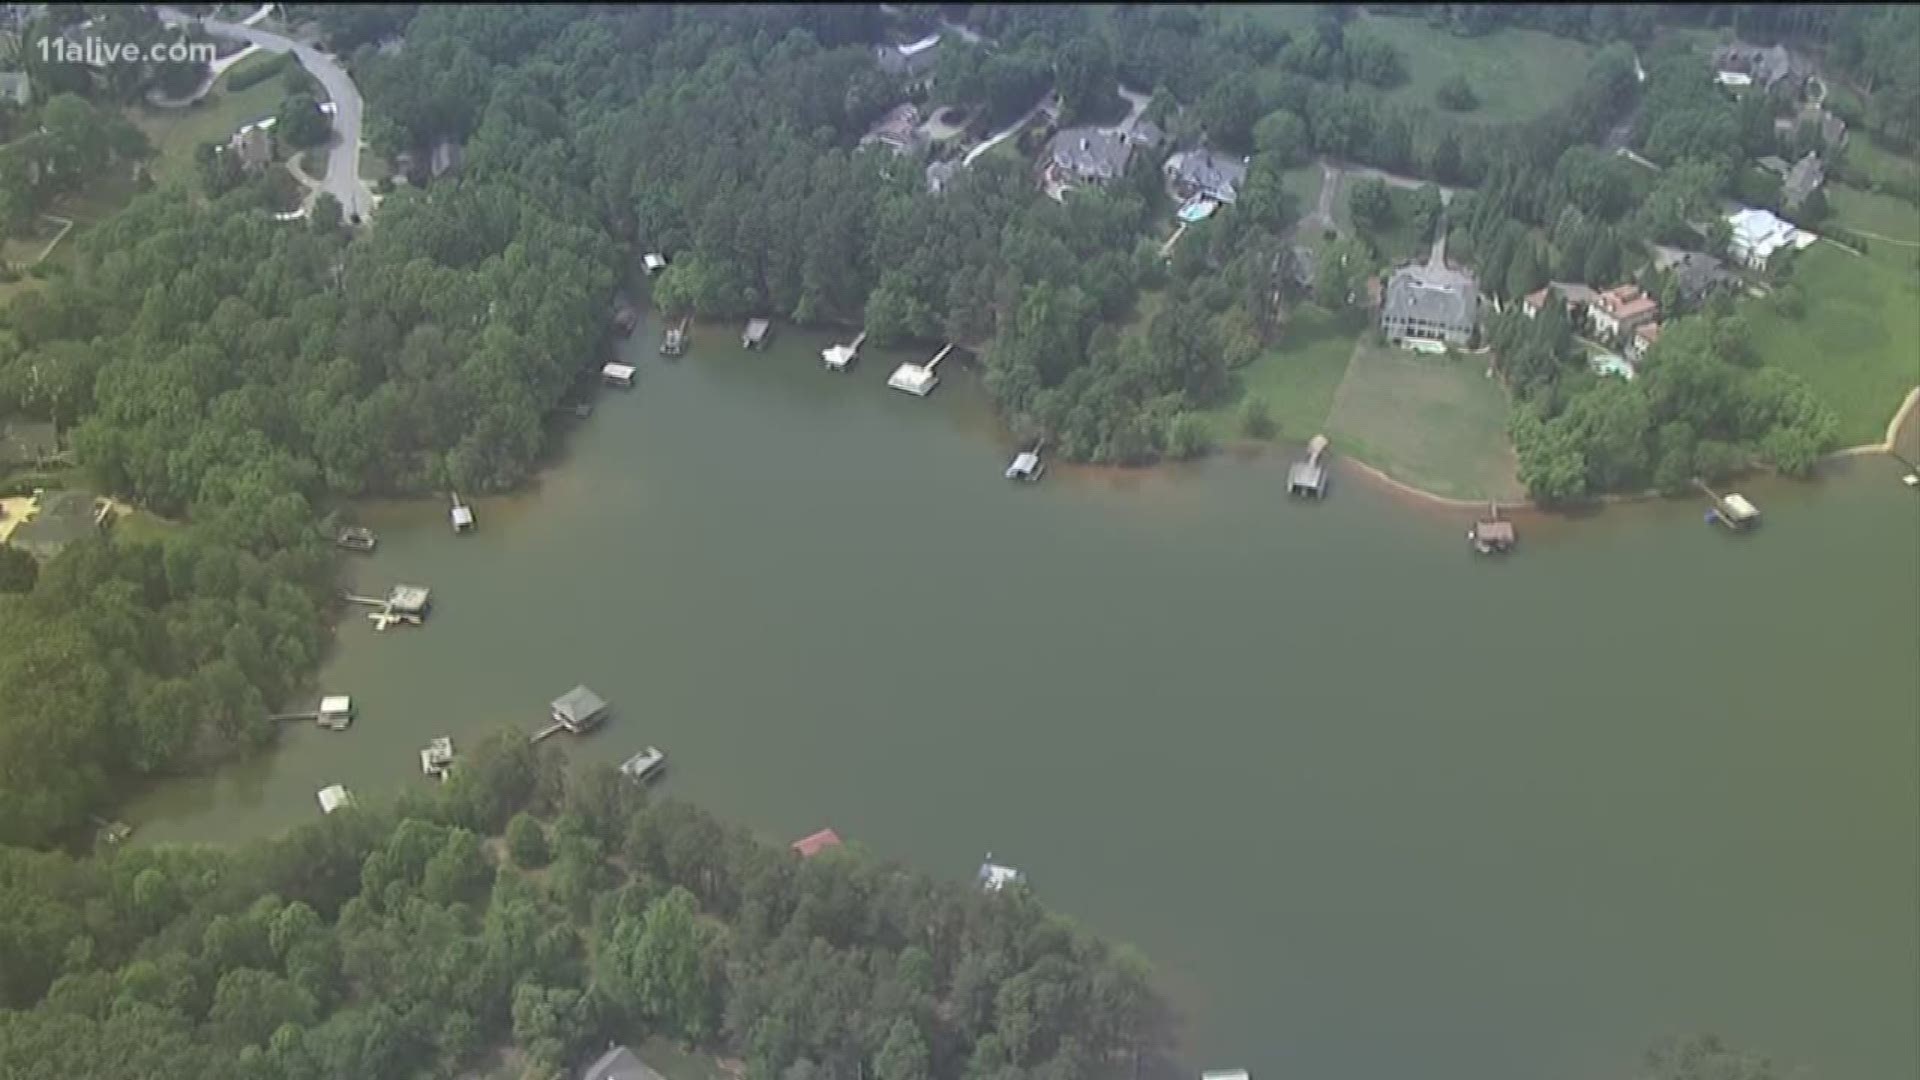 A son and emergency responders were unable to save a man investigators believe fell off a dock into Lake Lanier on Saturday.